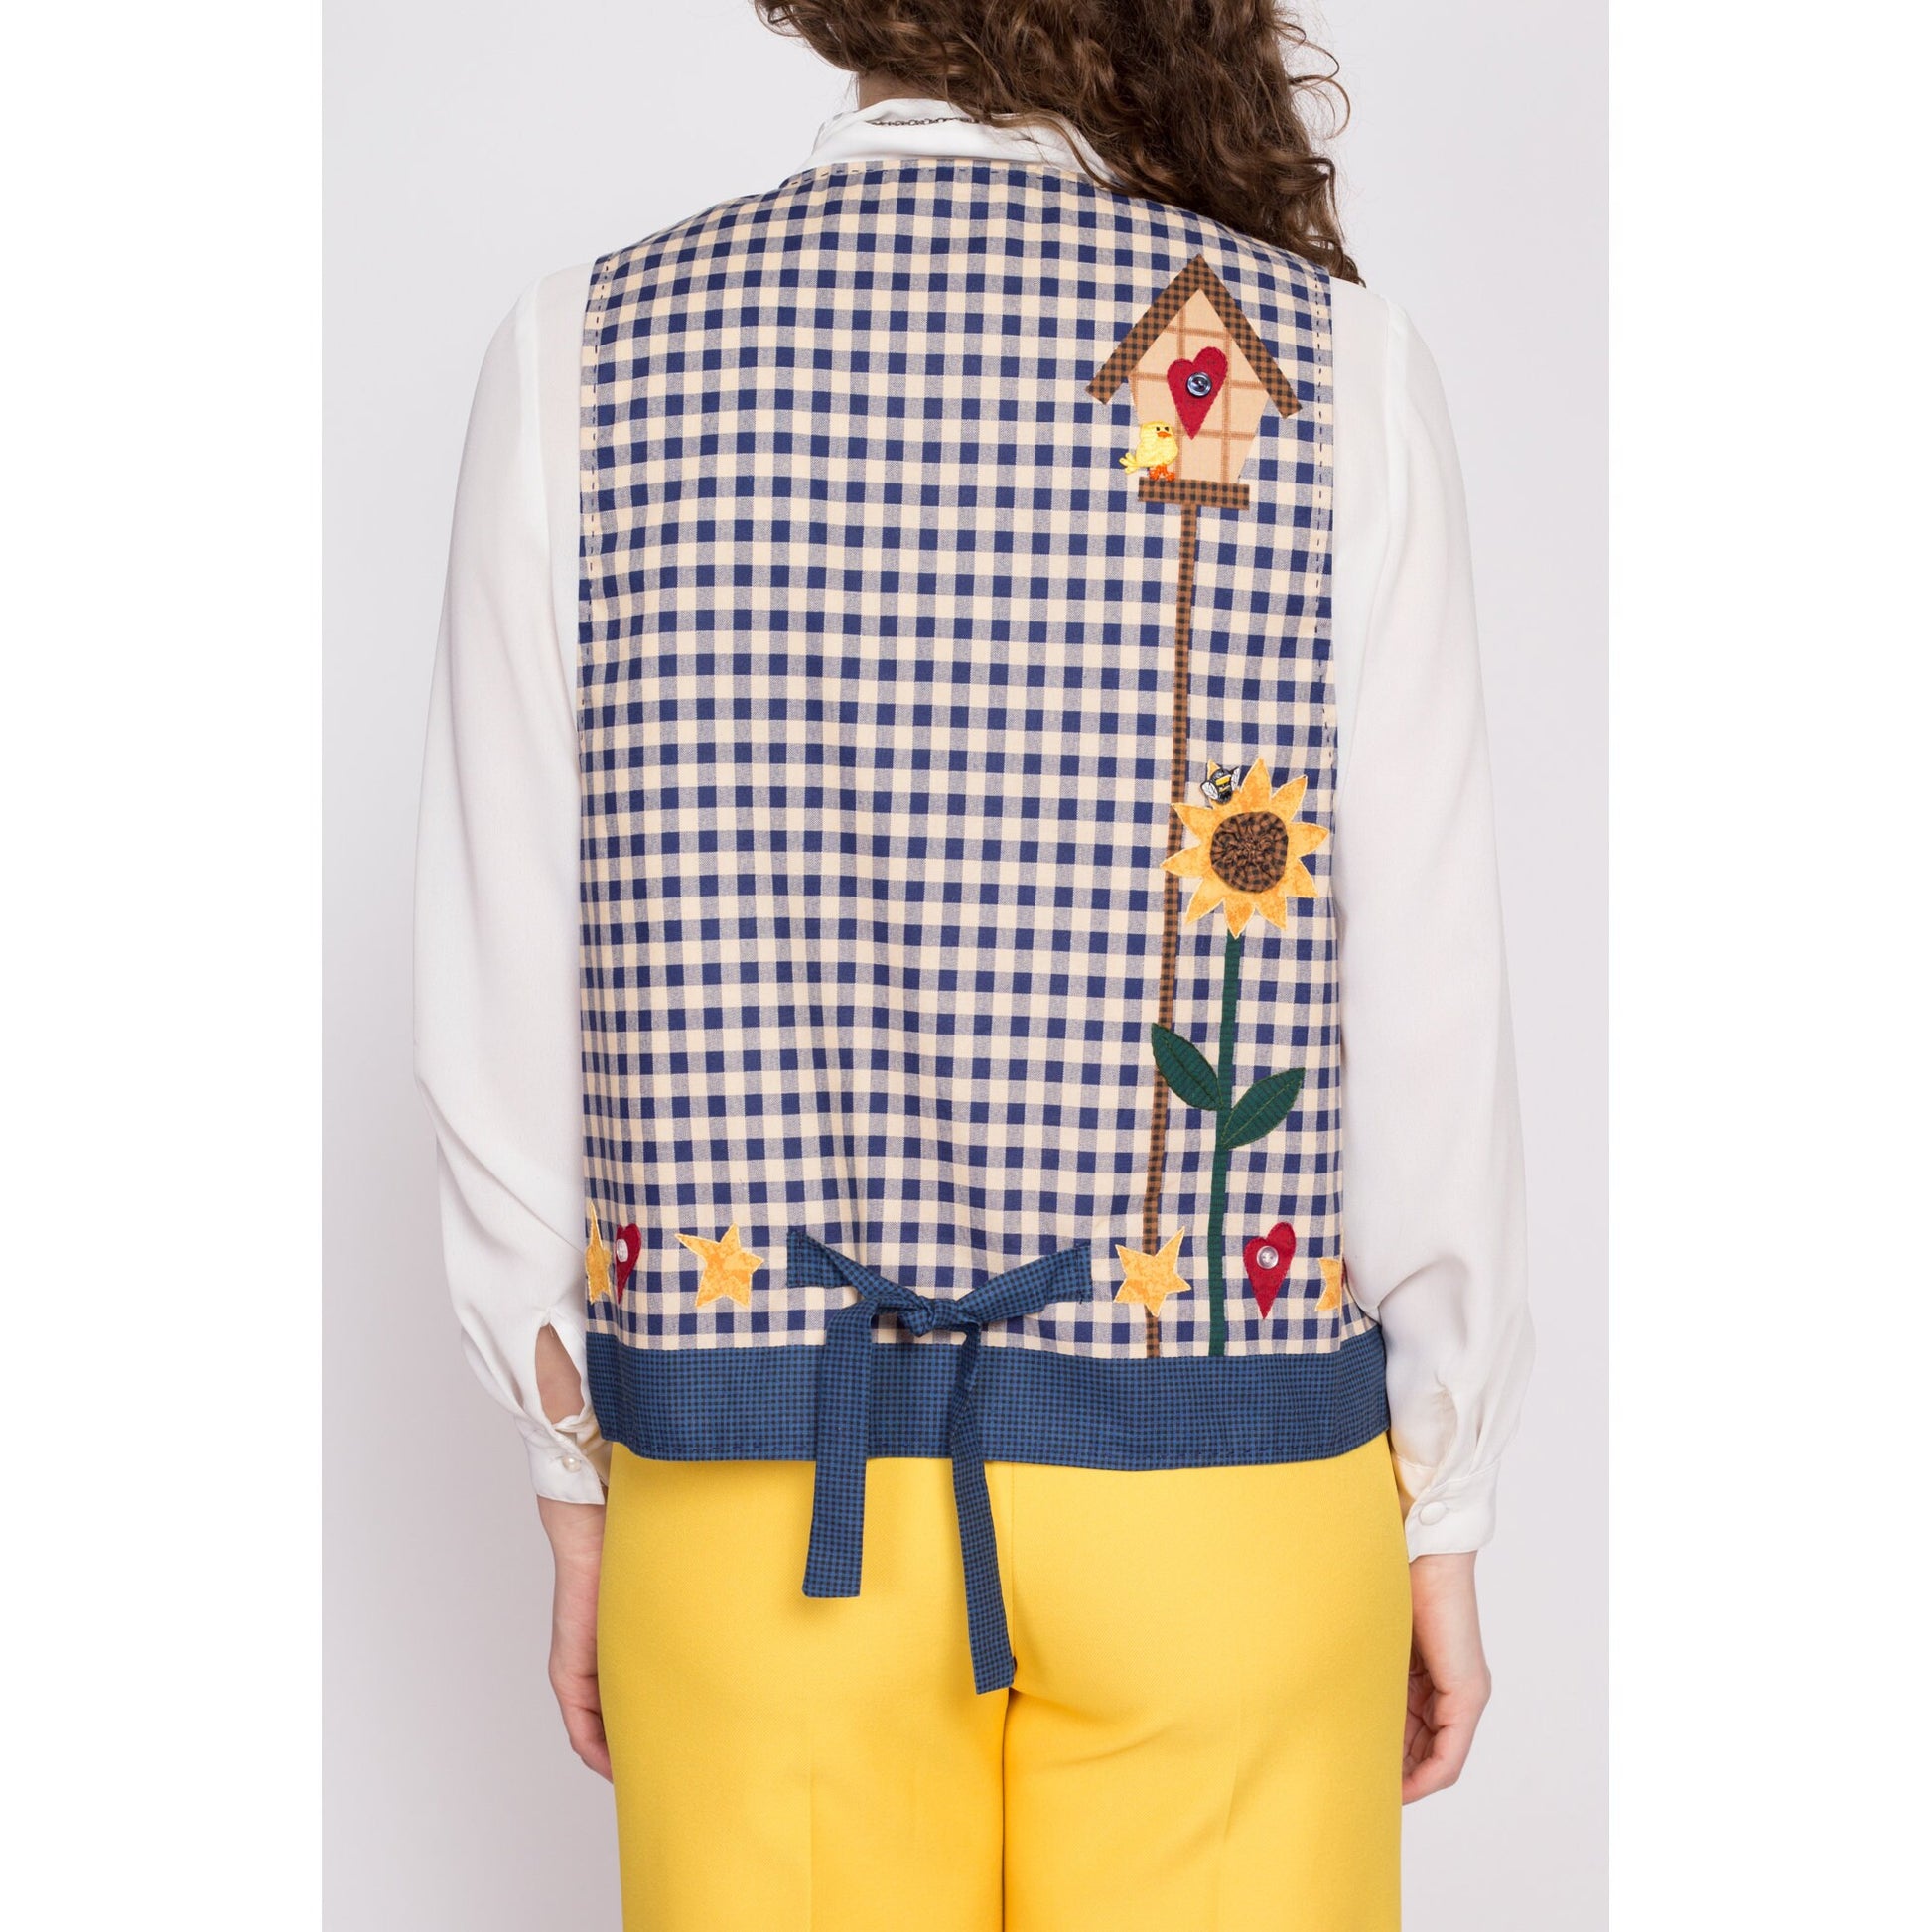 Vintage Sunflower Gingham Novelty Vest - Large to XL | 90s Patchwork Sleeveless Floral Open Fit Retro Top